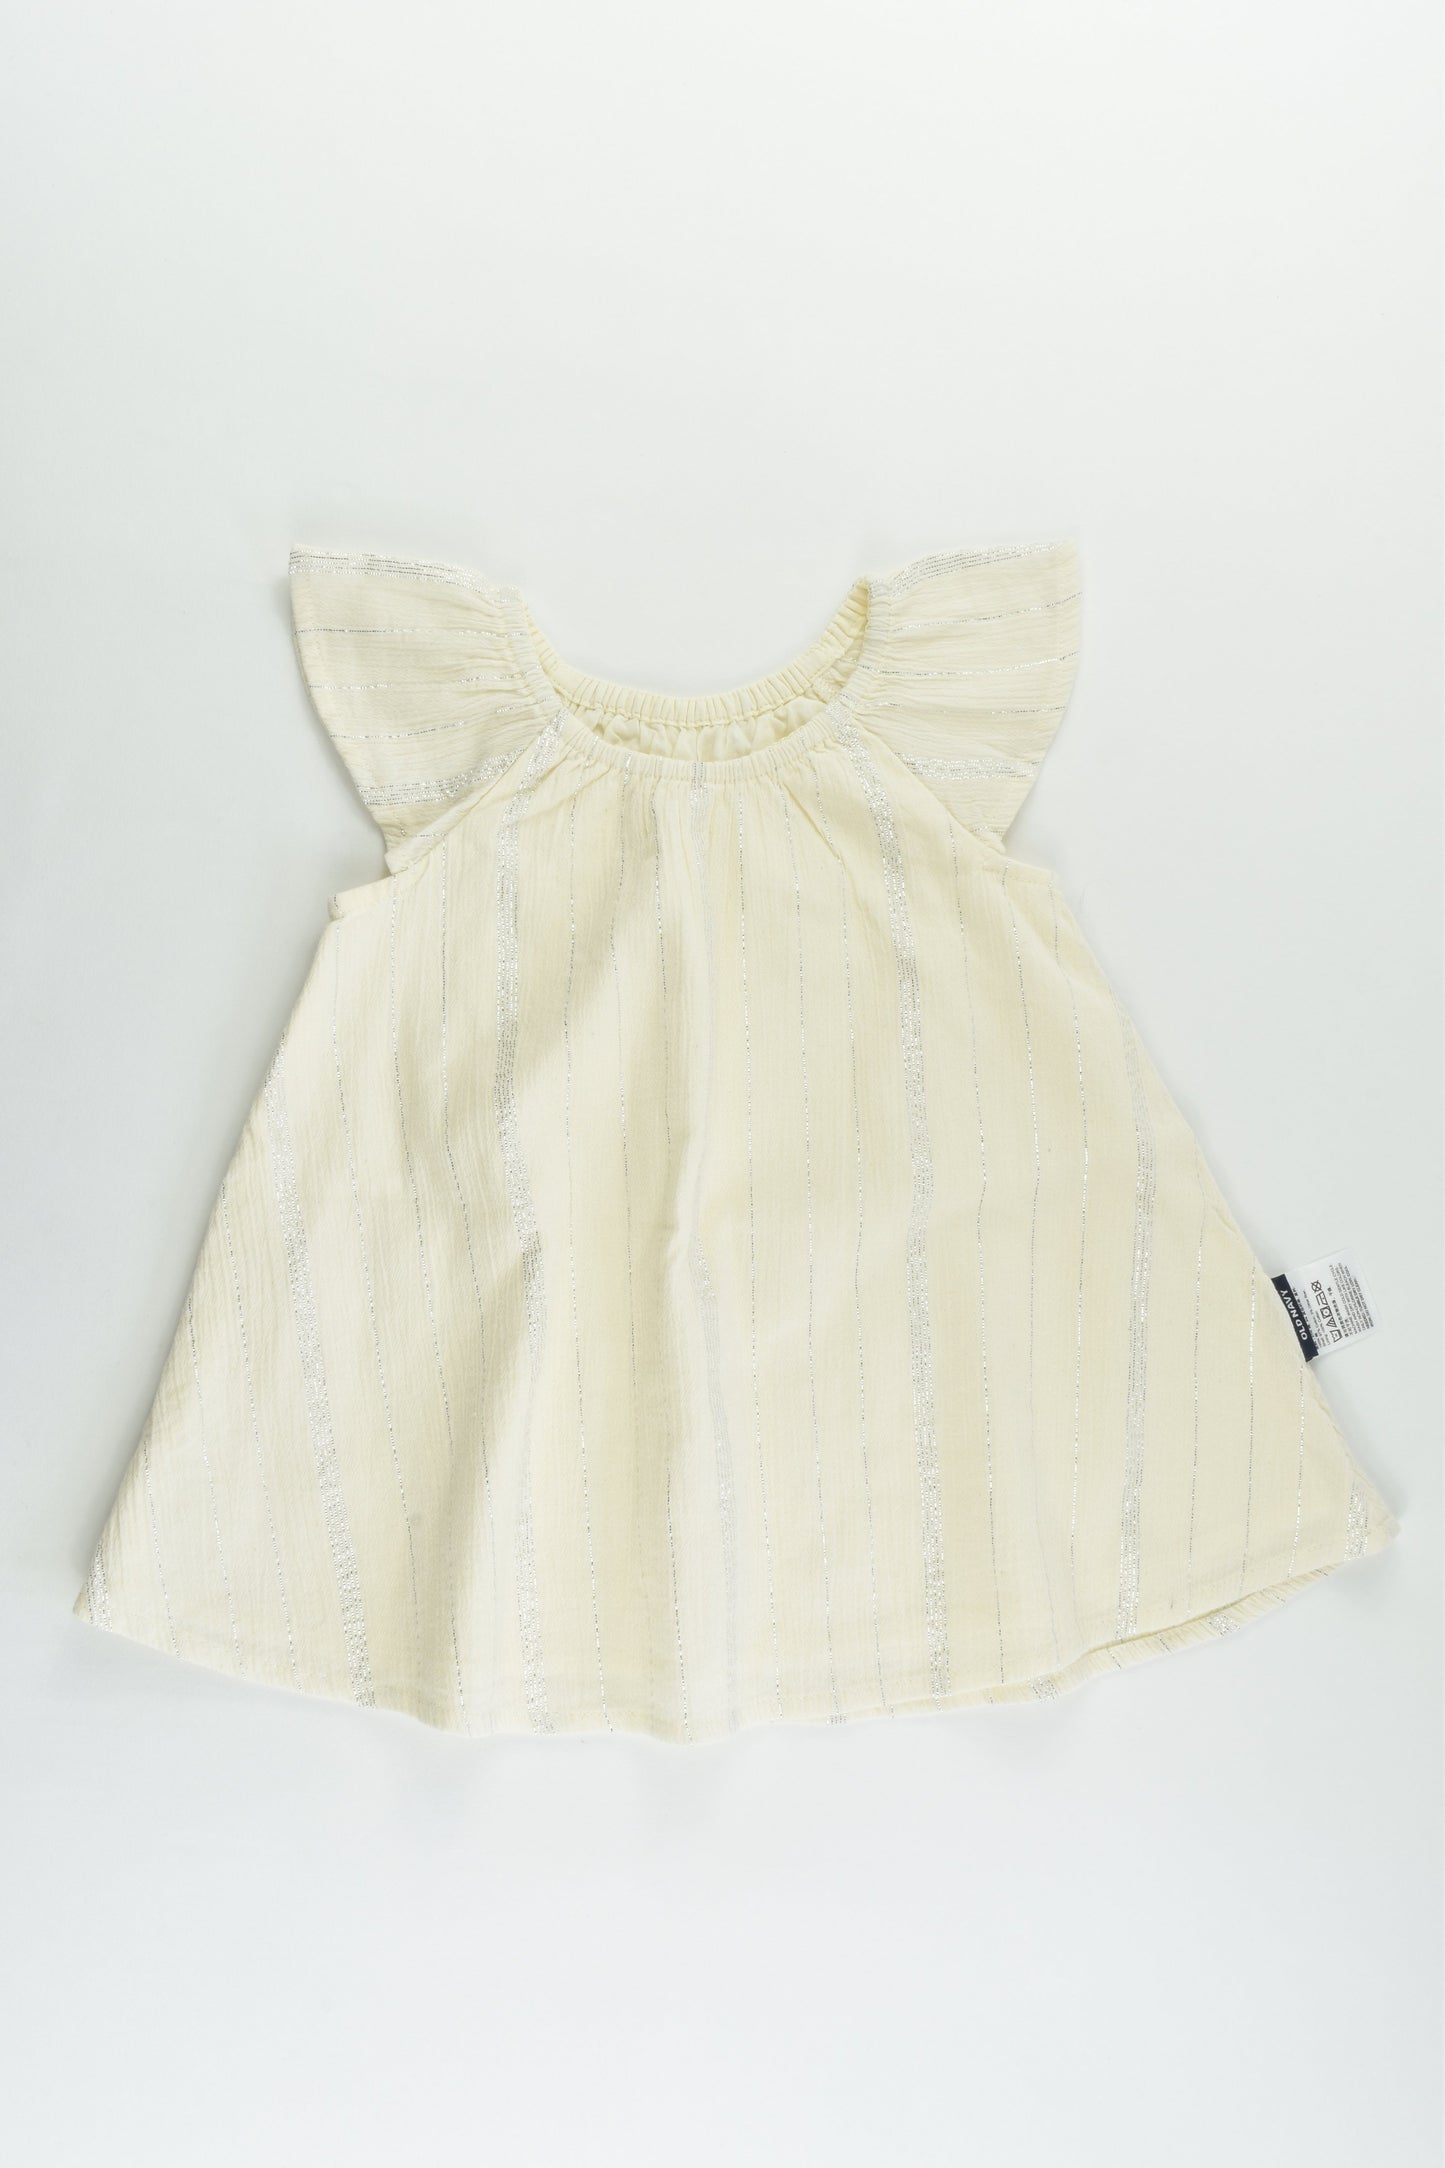 NEW Old Navy Size 00 (3-6 months) Lined Dress